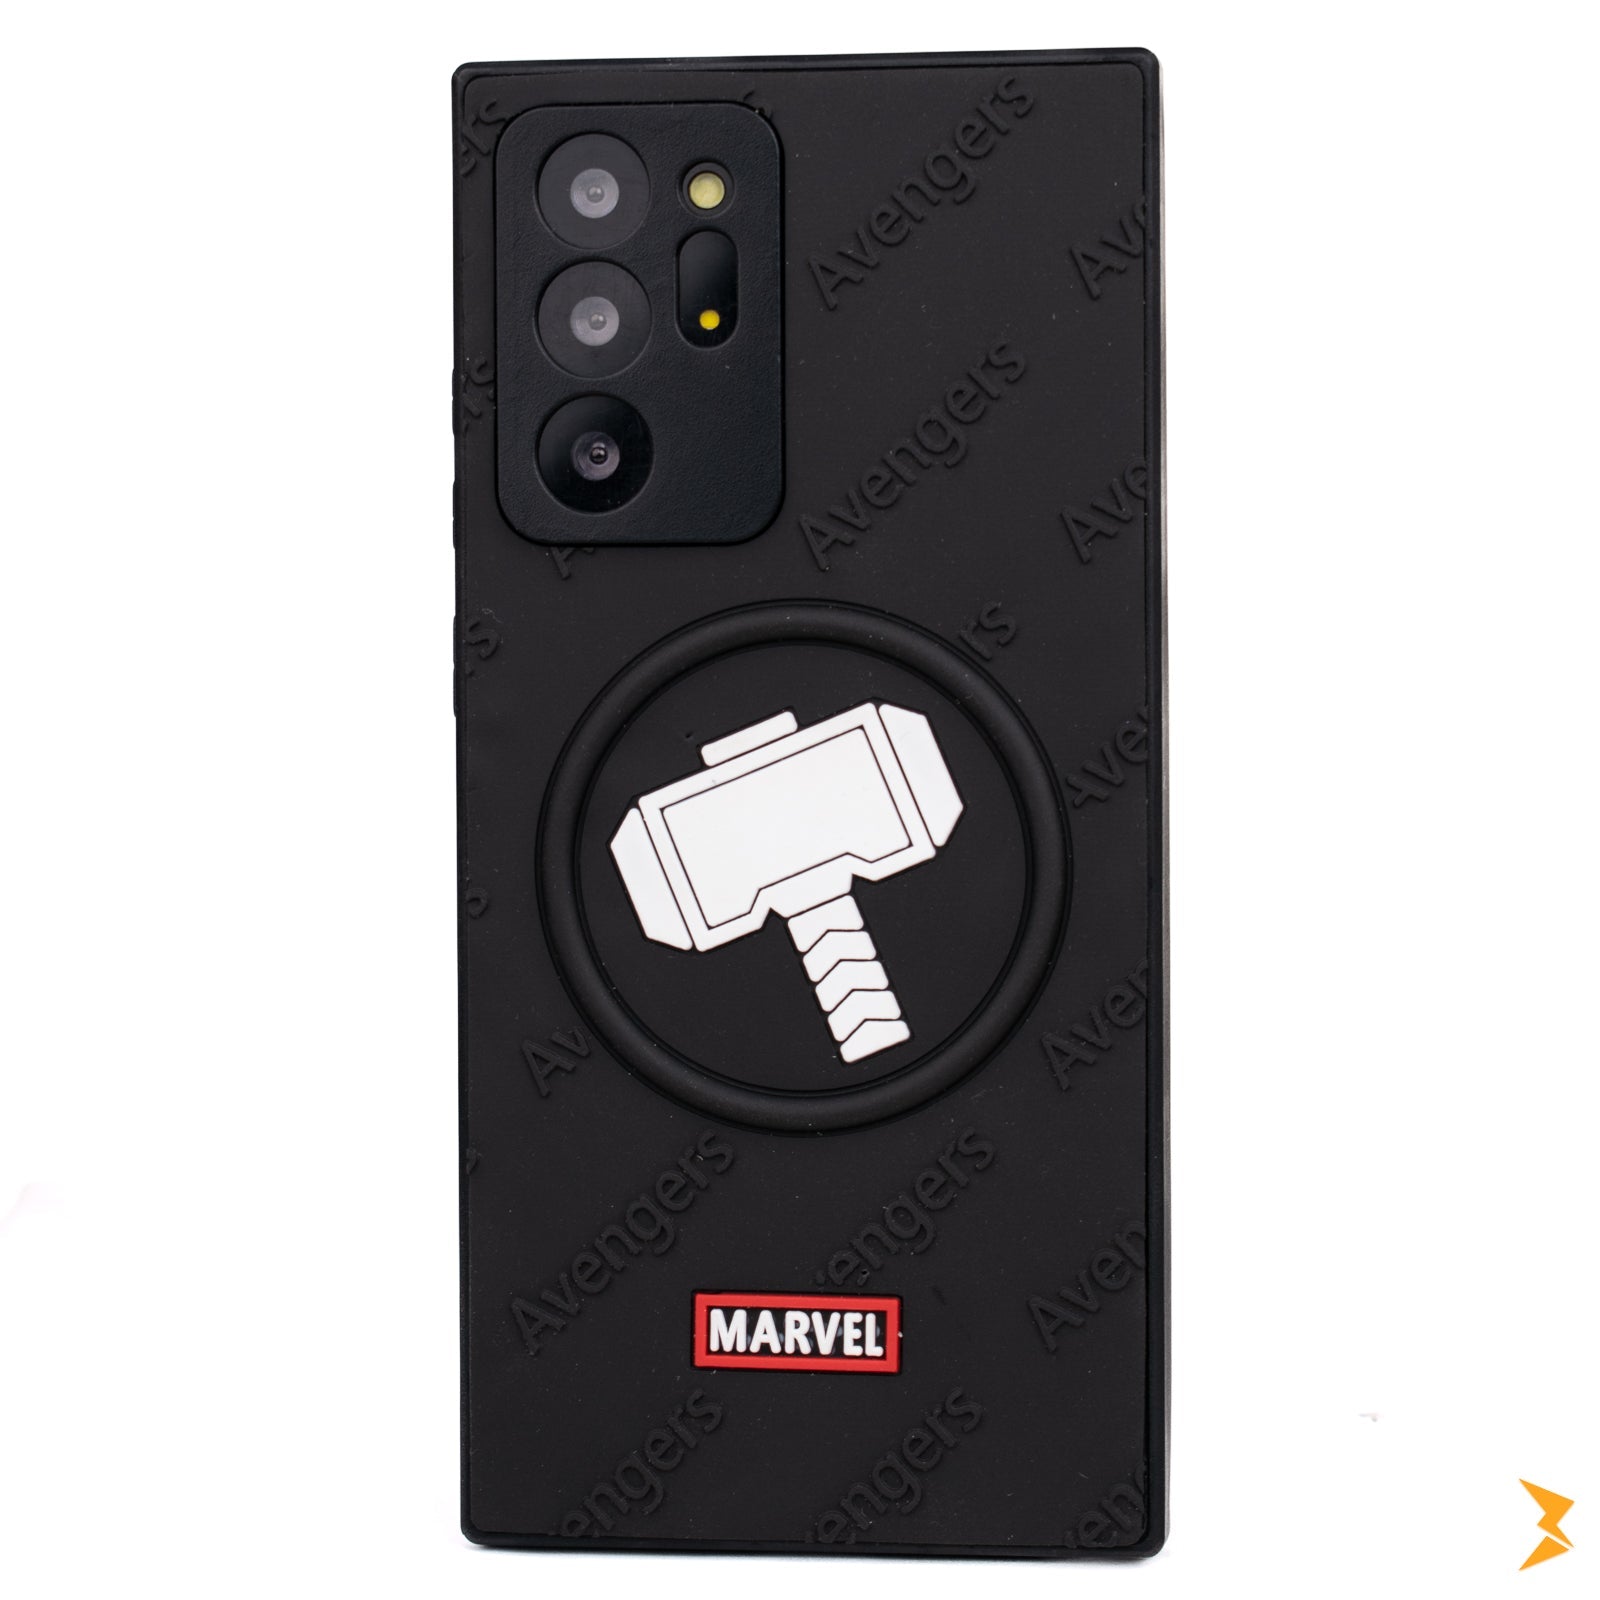 Q Series MARVEL Camera Protection Case Samsung Note 20 ultra Three store